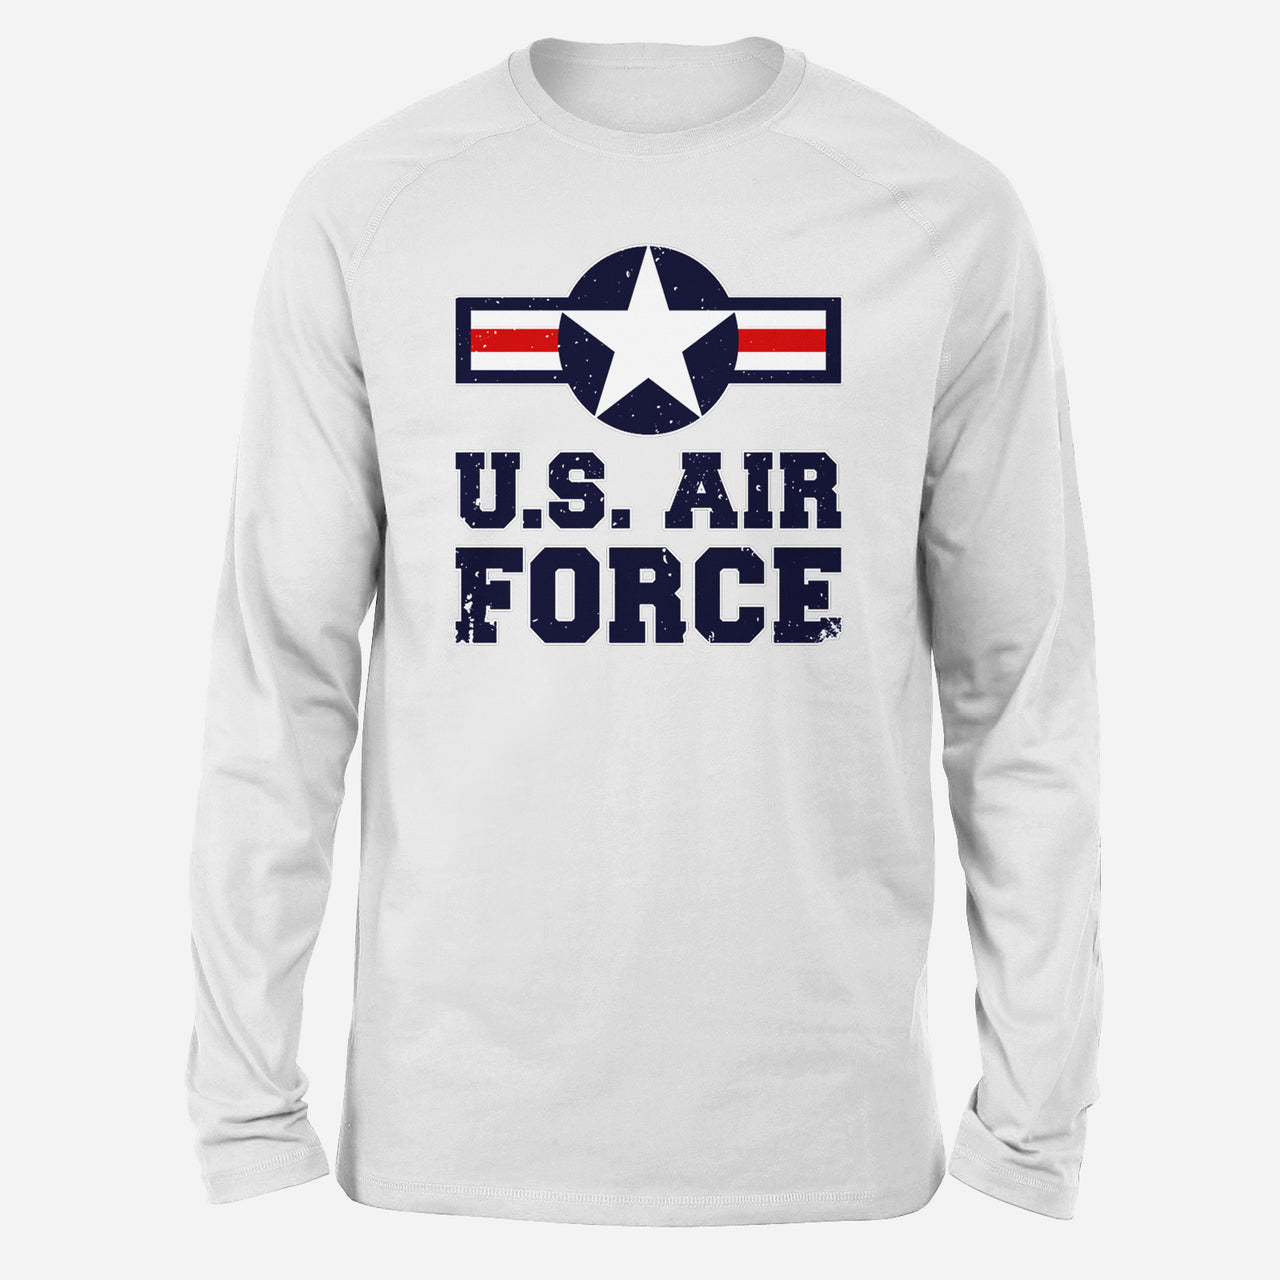 US Air Force Designed Long-Sleeve T-Shirts